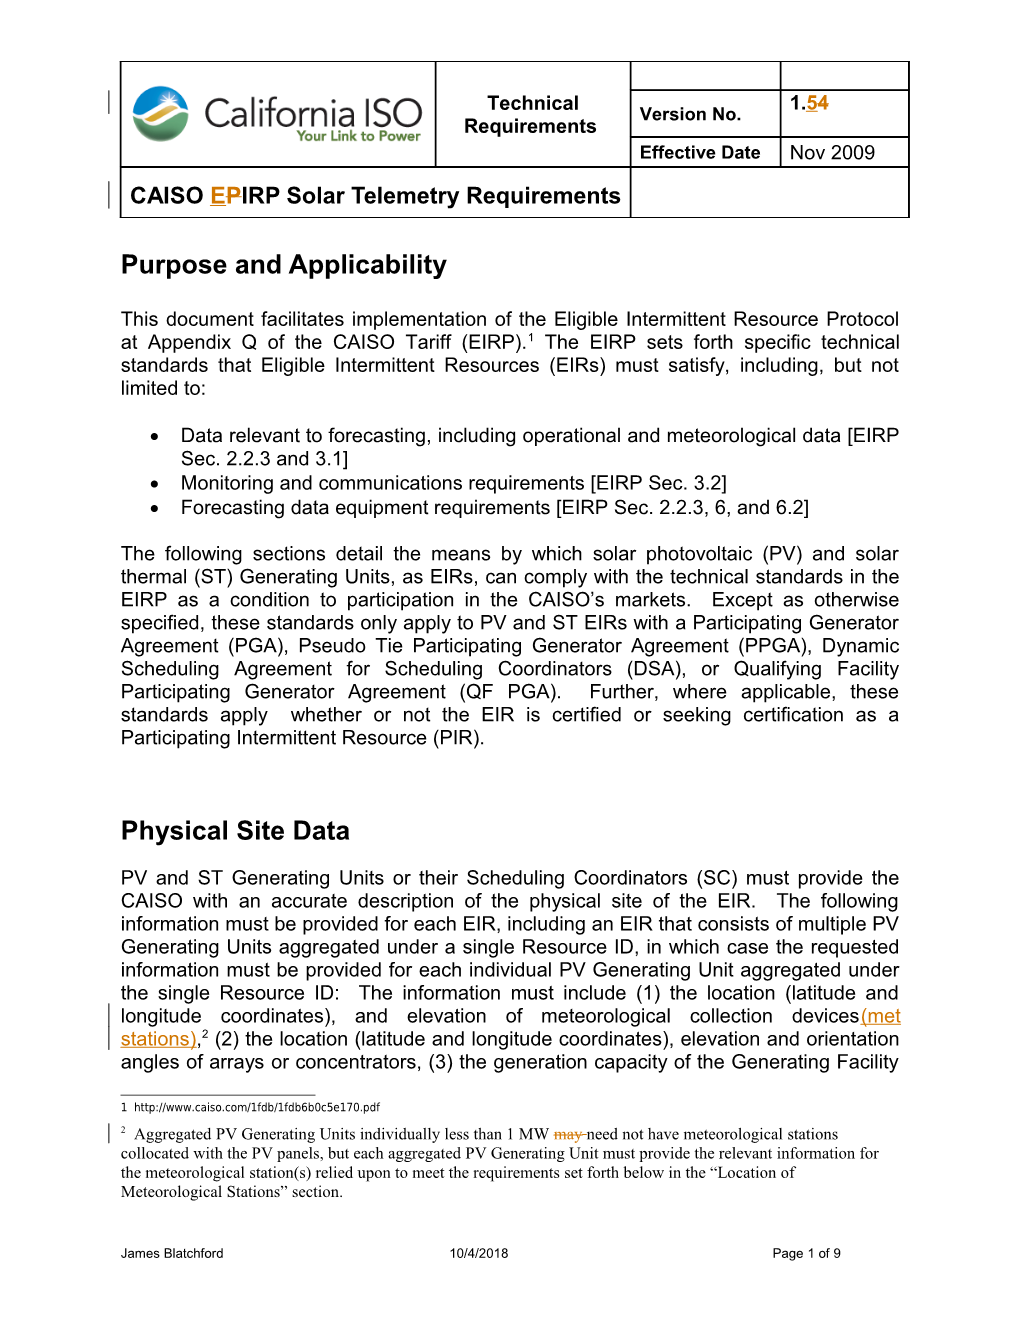 ISO PIRP Solar Technical Requirements - Revision 5